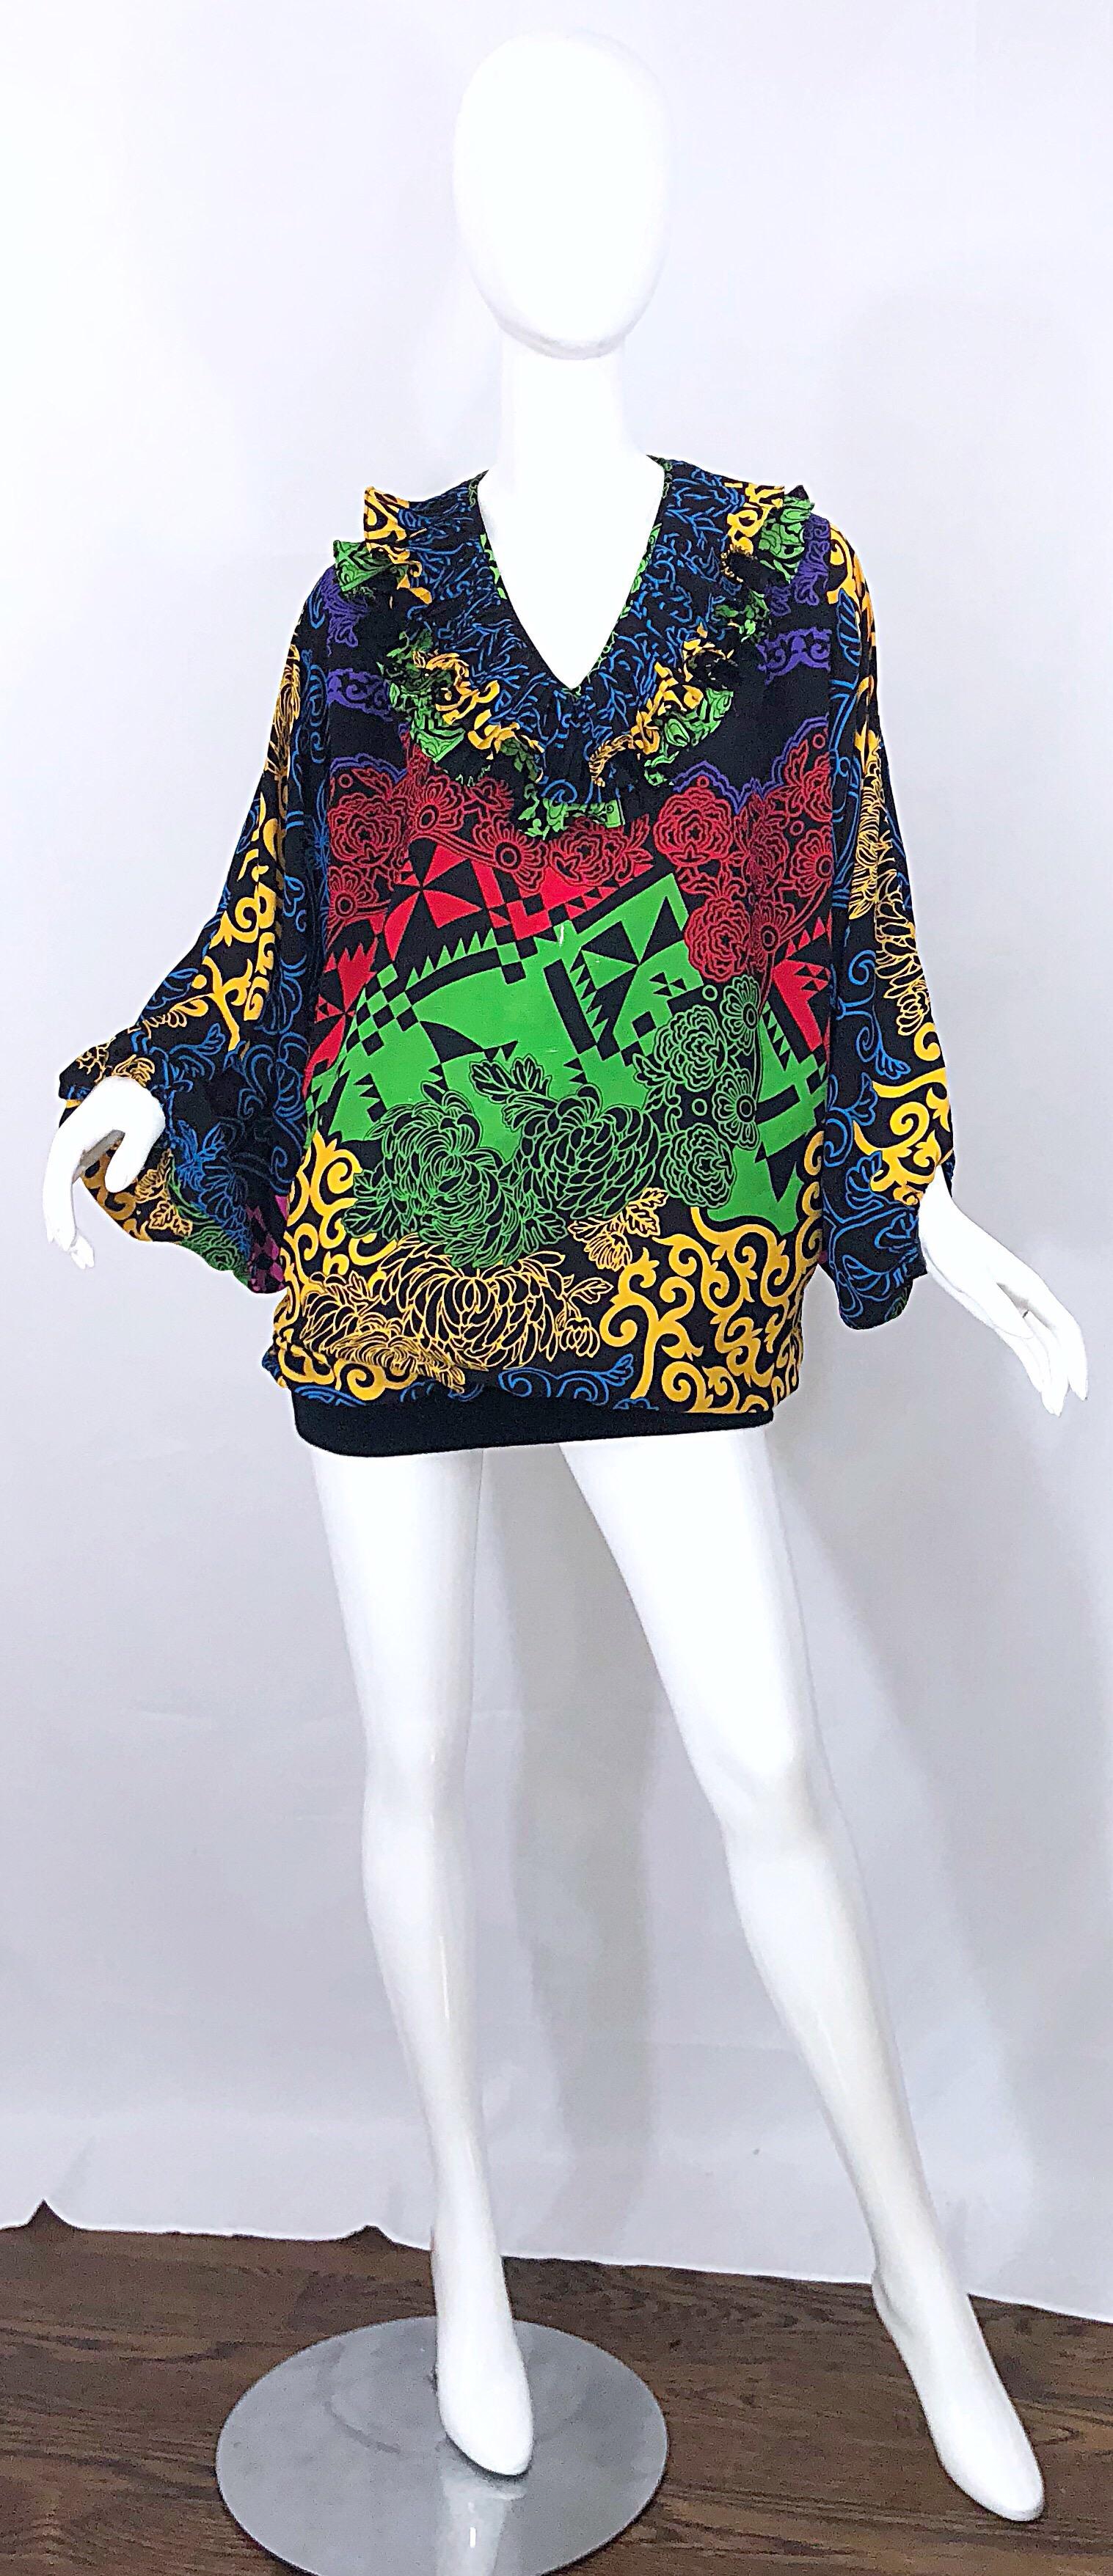 Amazing 1980s Diane Freis  neon abstract geometric print tunic or mini dress! Features signature Diane Freis slouchy fit, with a fitted stretch hem. Ruffled collar along the neck. Free dolman sleeves will fit an array of sizes. Vibrant colors of